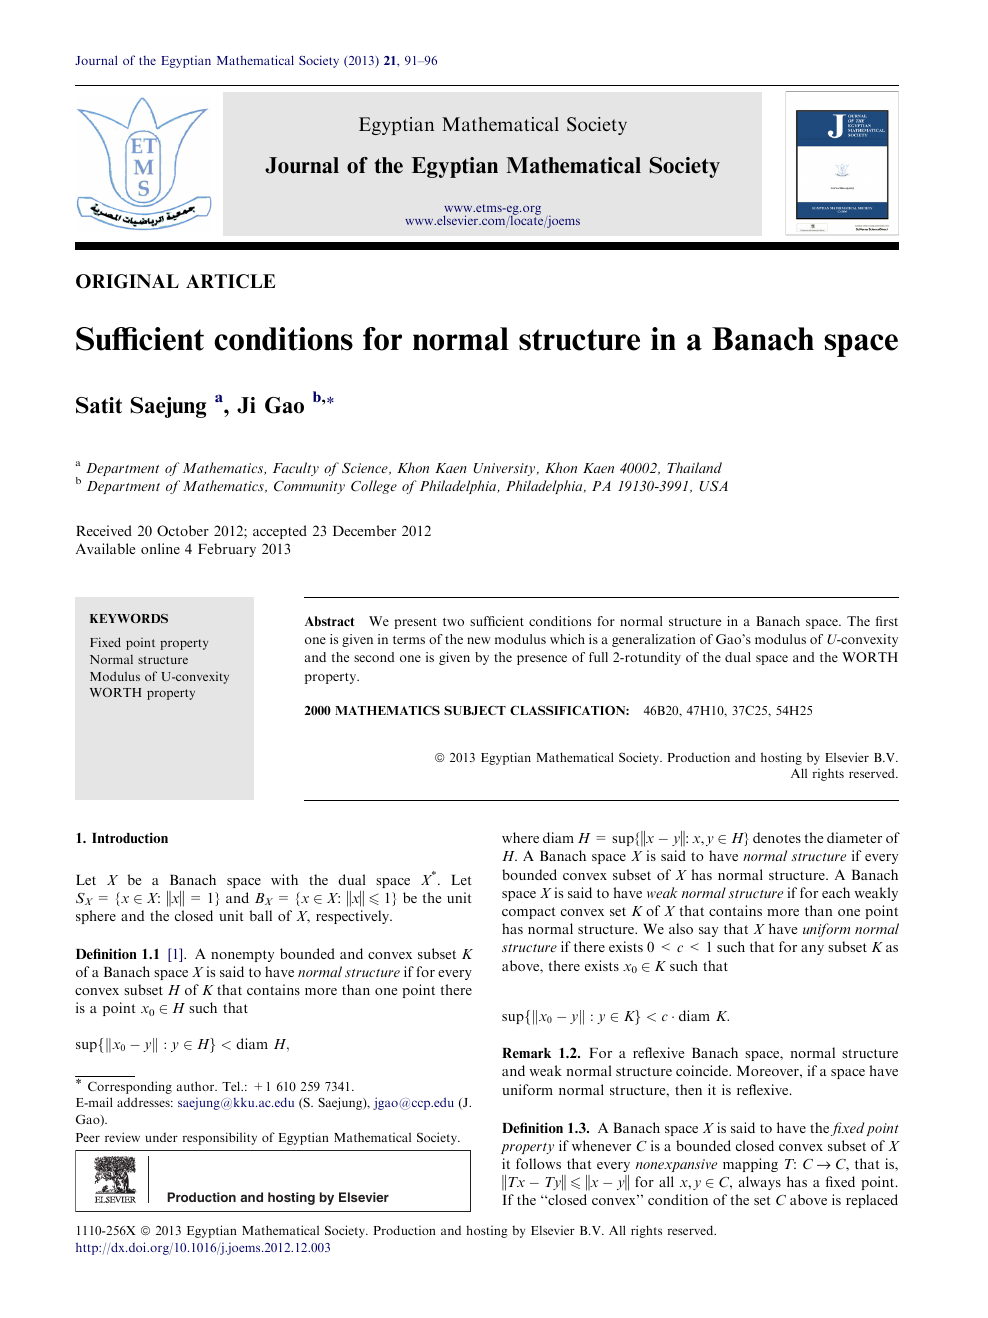 Sufficient Conditions For Normal Structure In A Banach Space Topic Of Research Paper In Mathematics Download Scholarly Article Pdf And Read For Free On Cyberleninka Open Science Hub